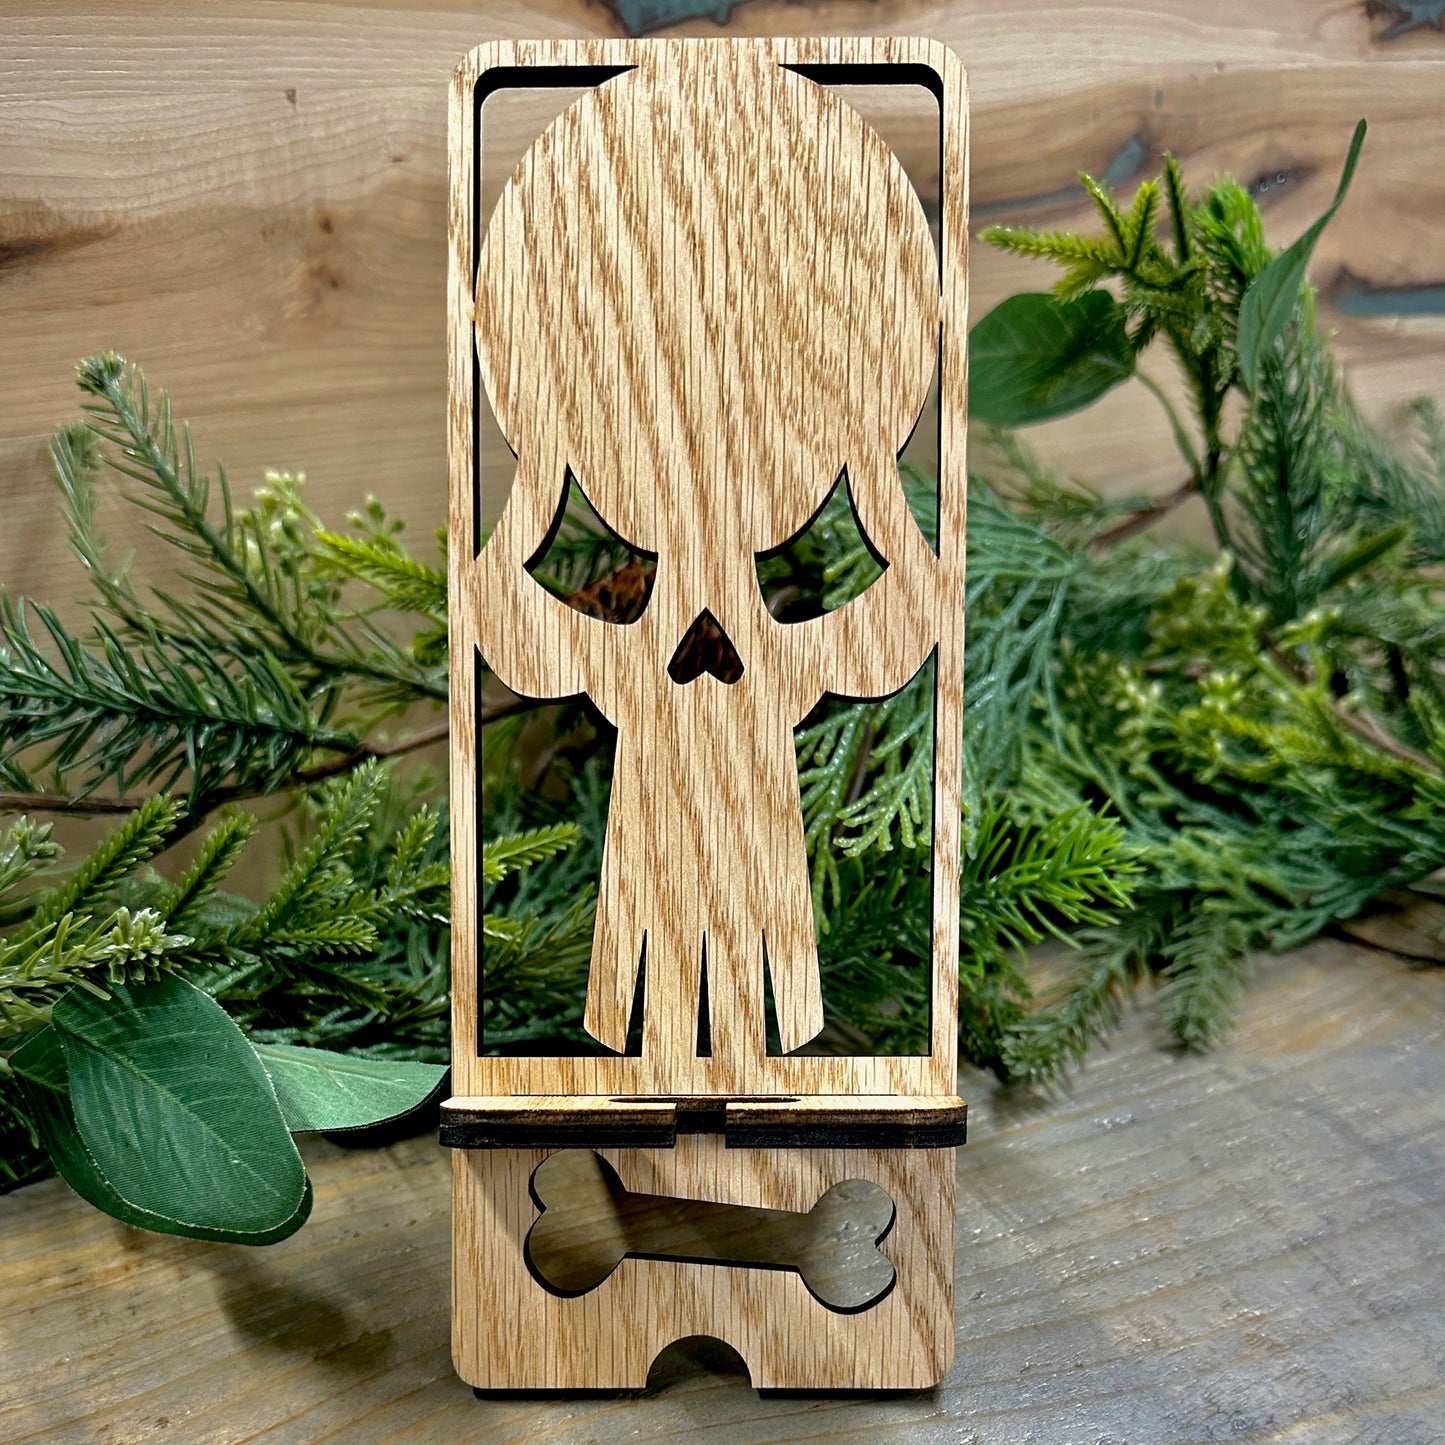 Wood Phone Stand and Decor - Skull Design